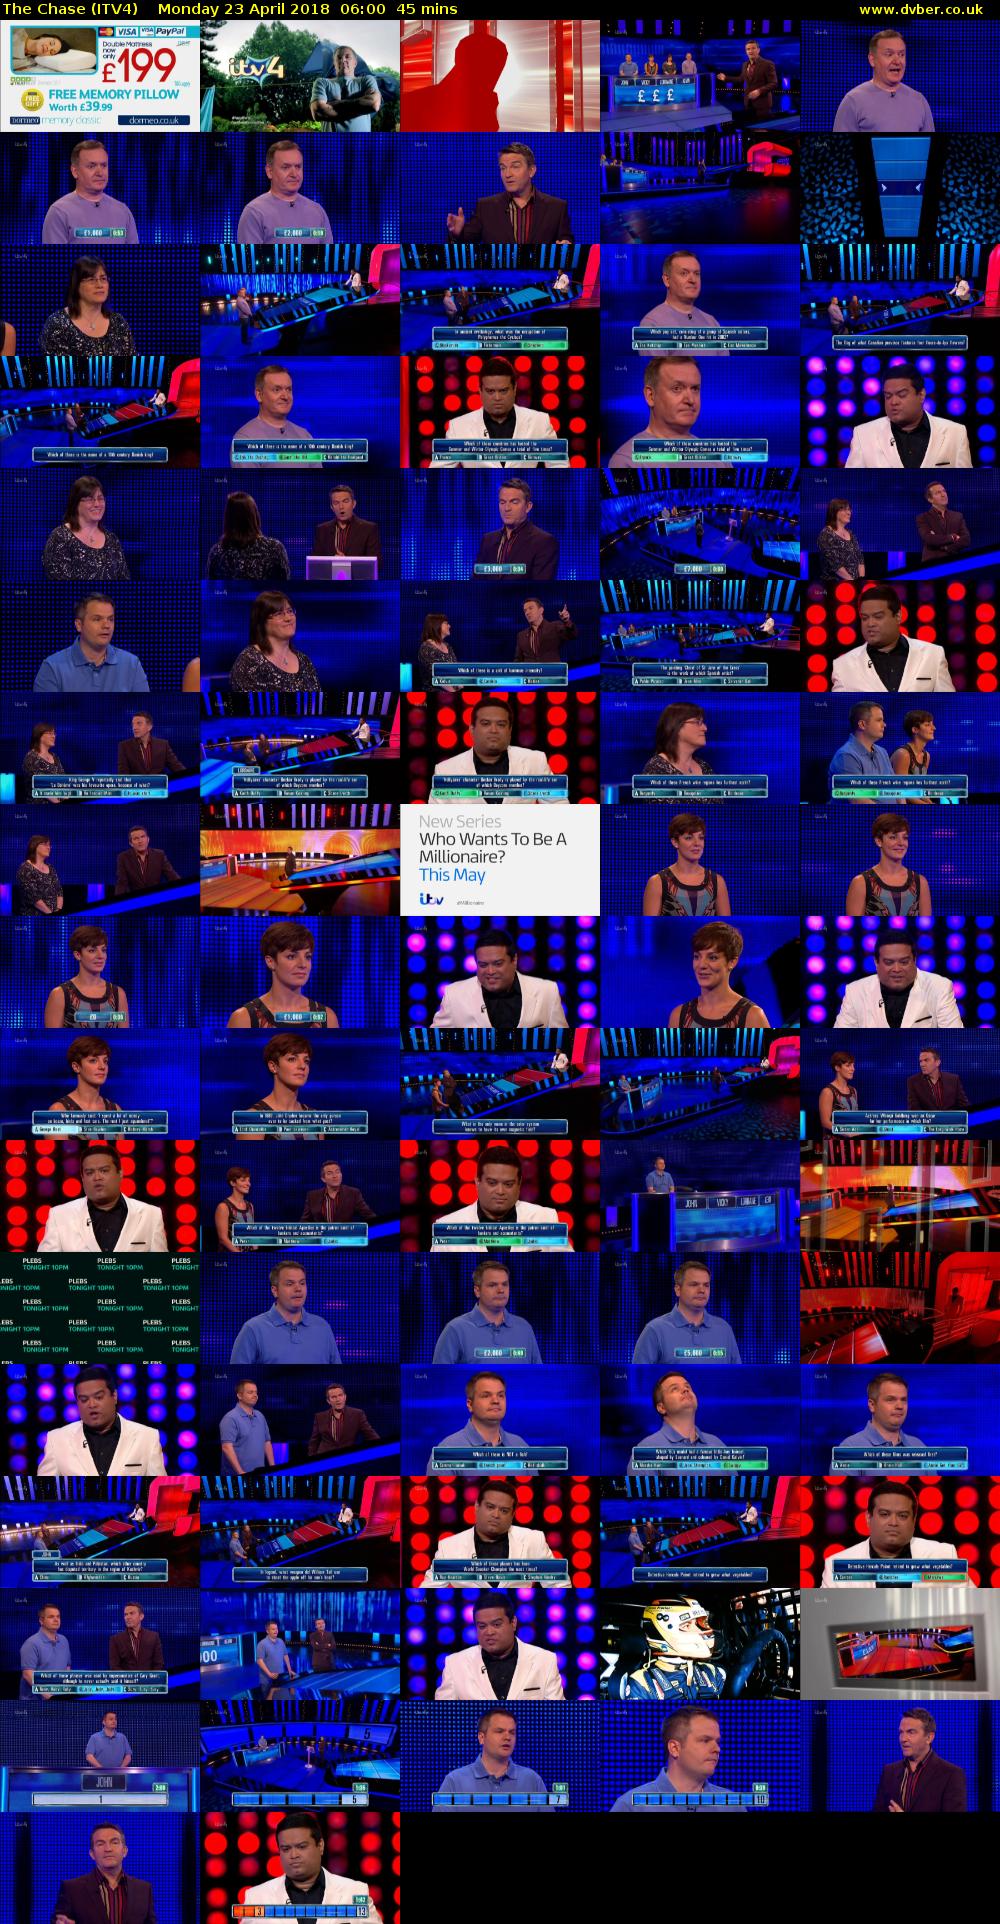 The Chase (ITV4) Monday 23 April 2018 06:00 - 06:45